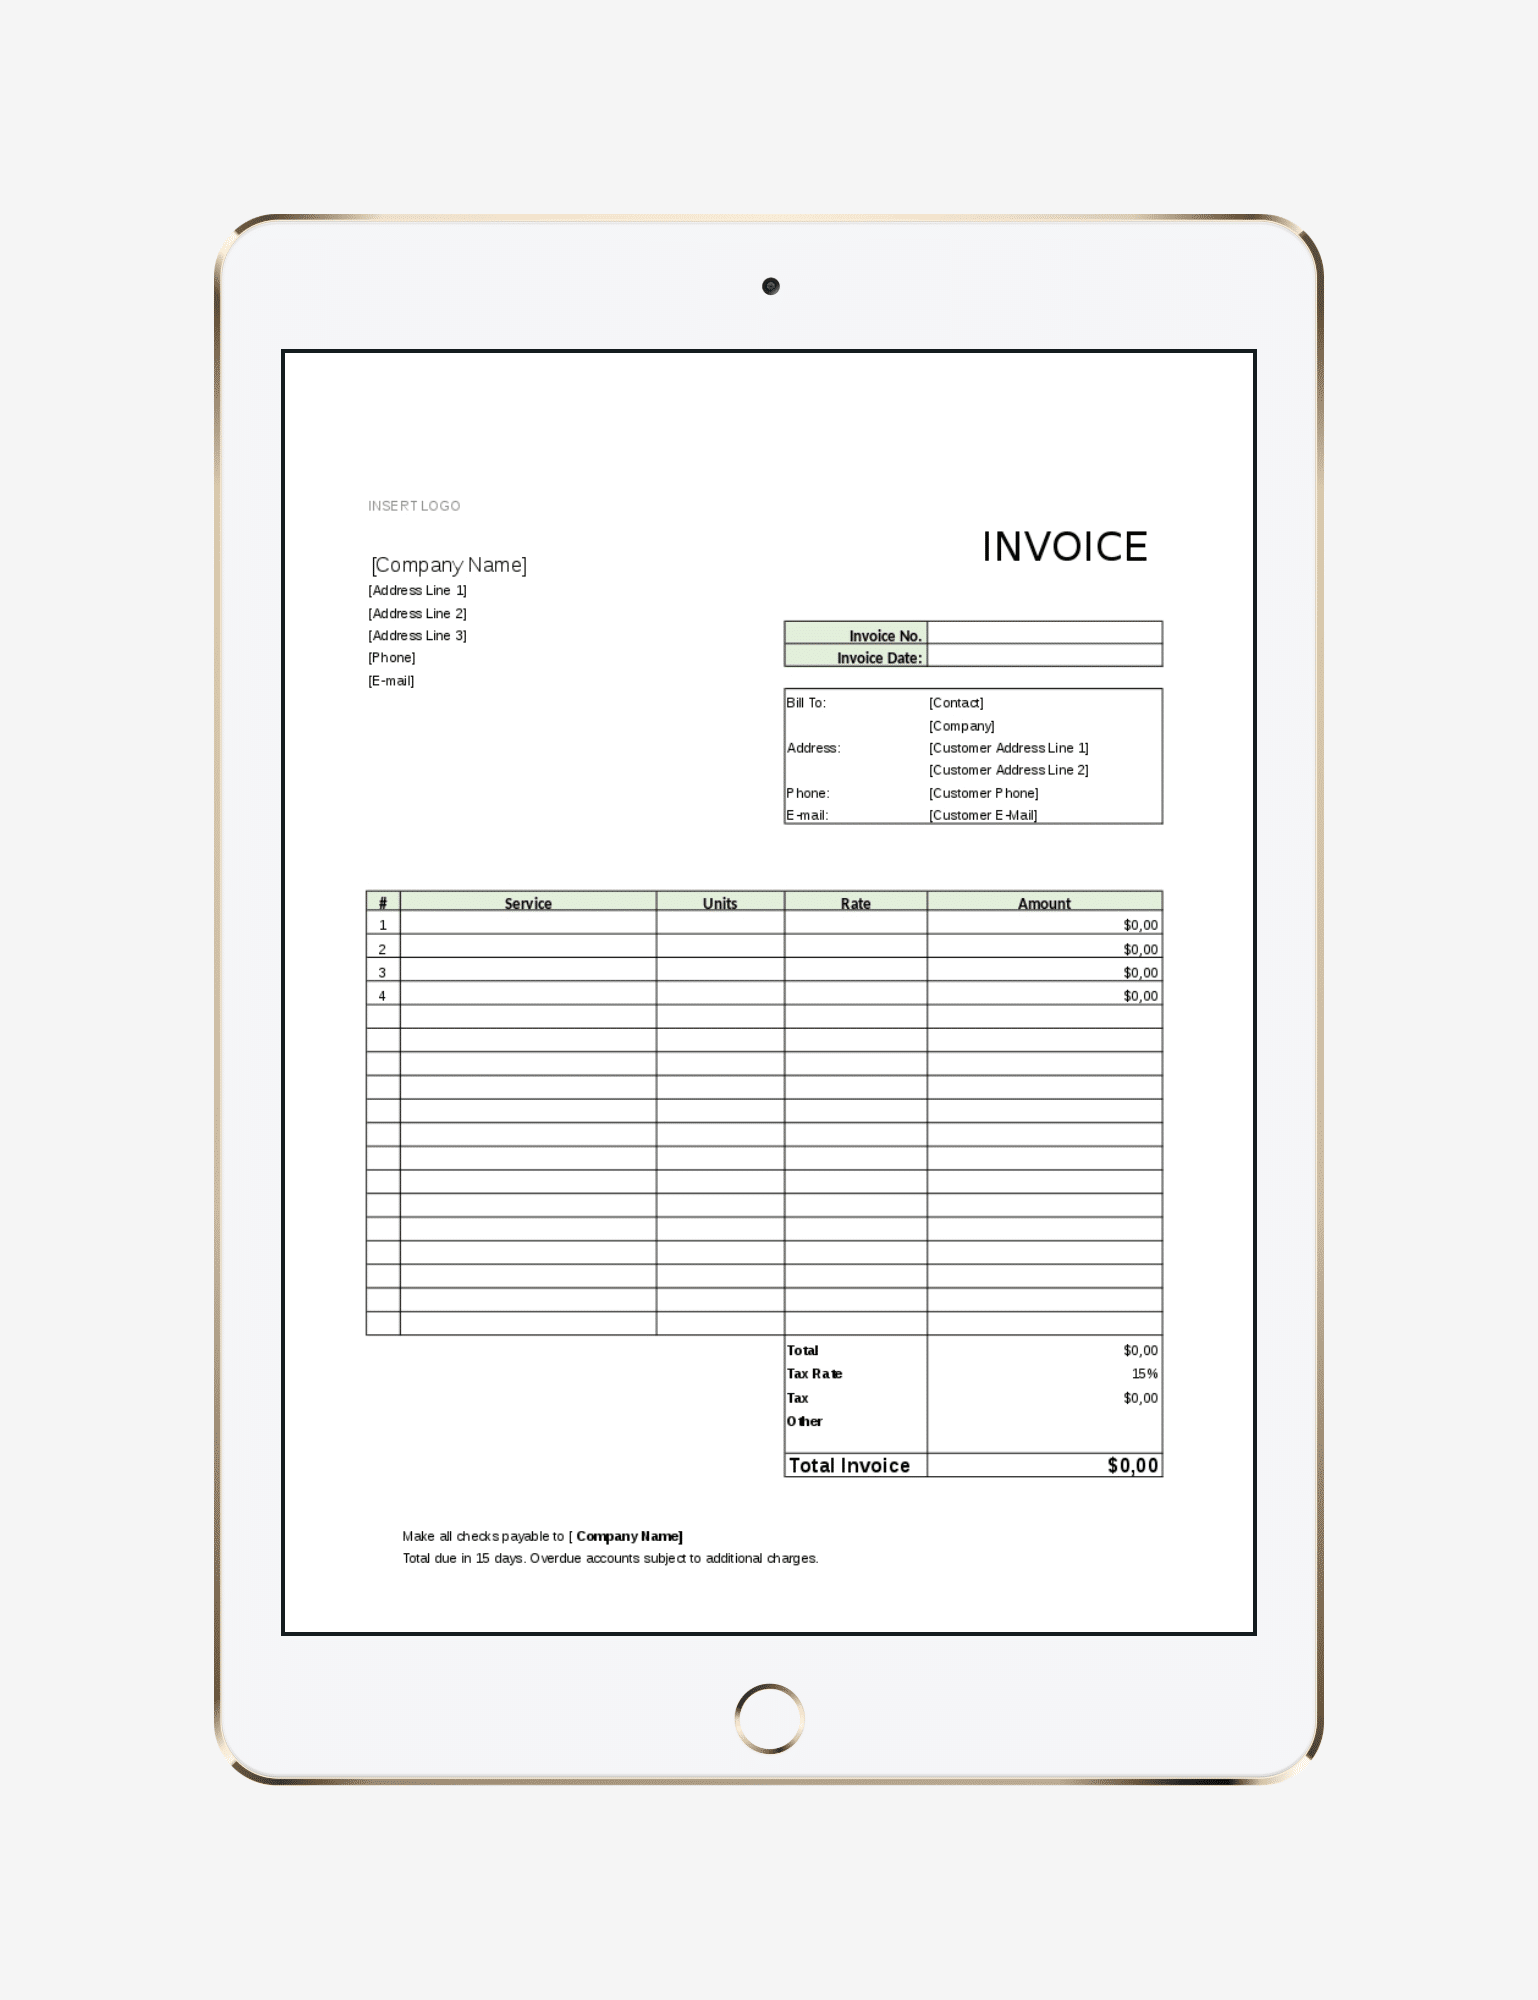 Invoice template - Project Manager Store For Invoice Template Ipad